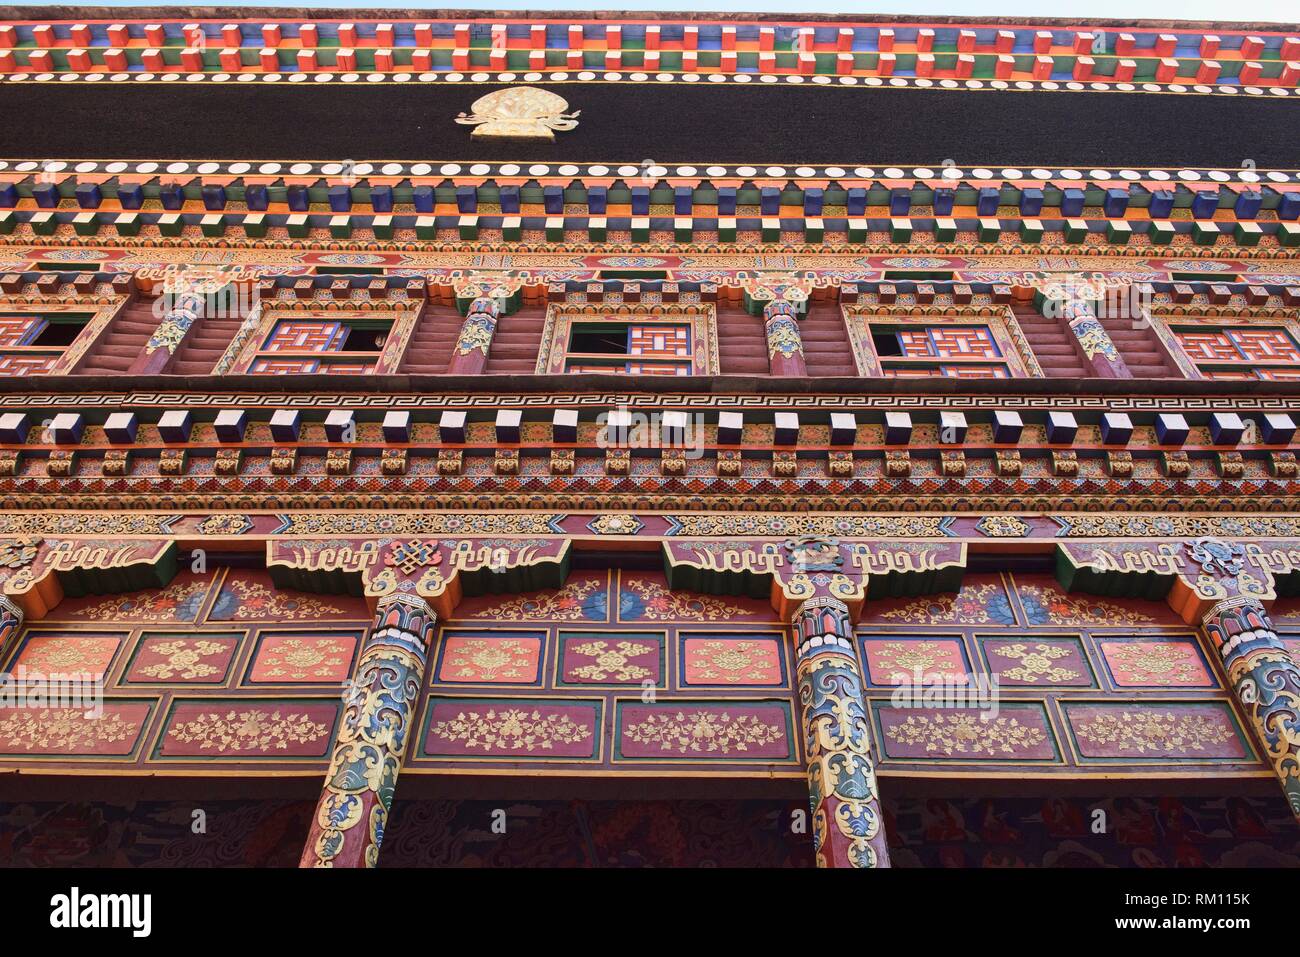 Architecture inside the Bakong Scripture Printing Press Monastery in Dege, Sichuan, China. Stock Photo